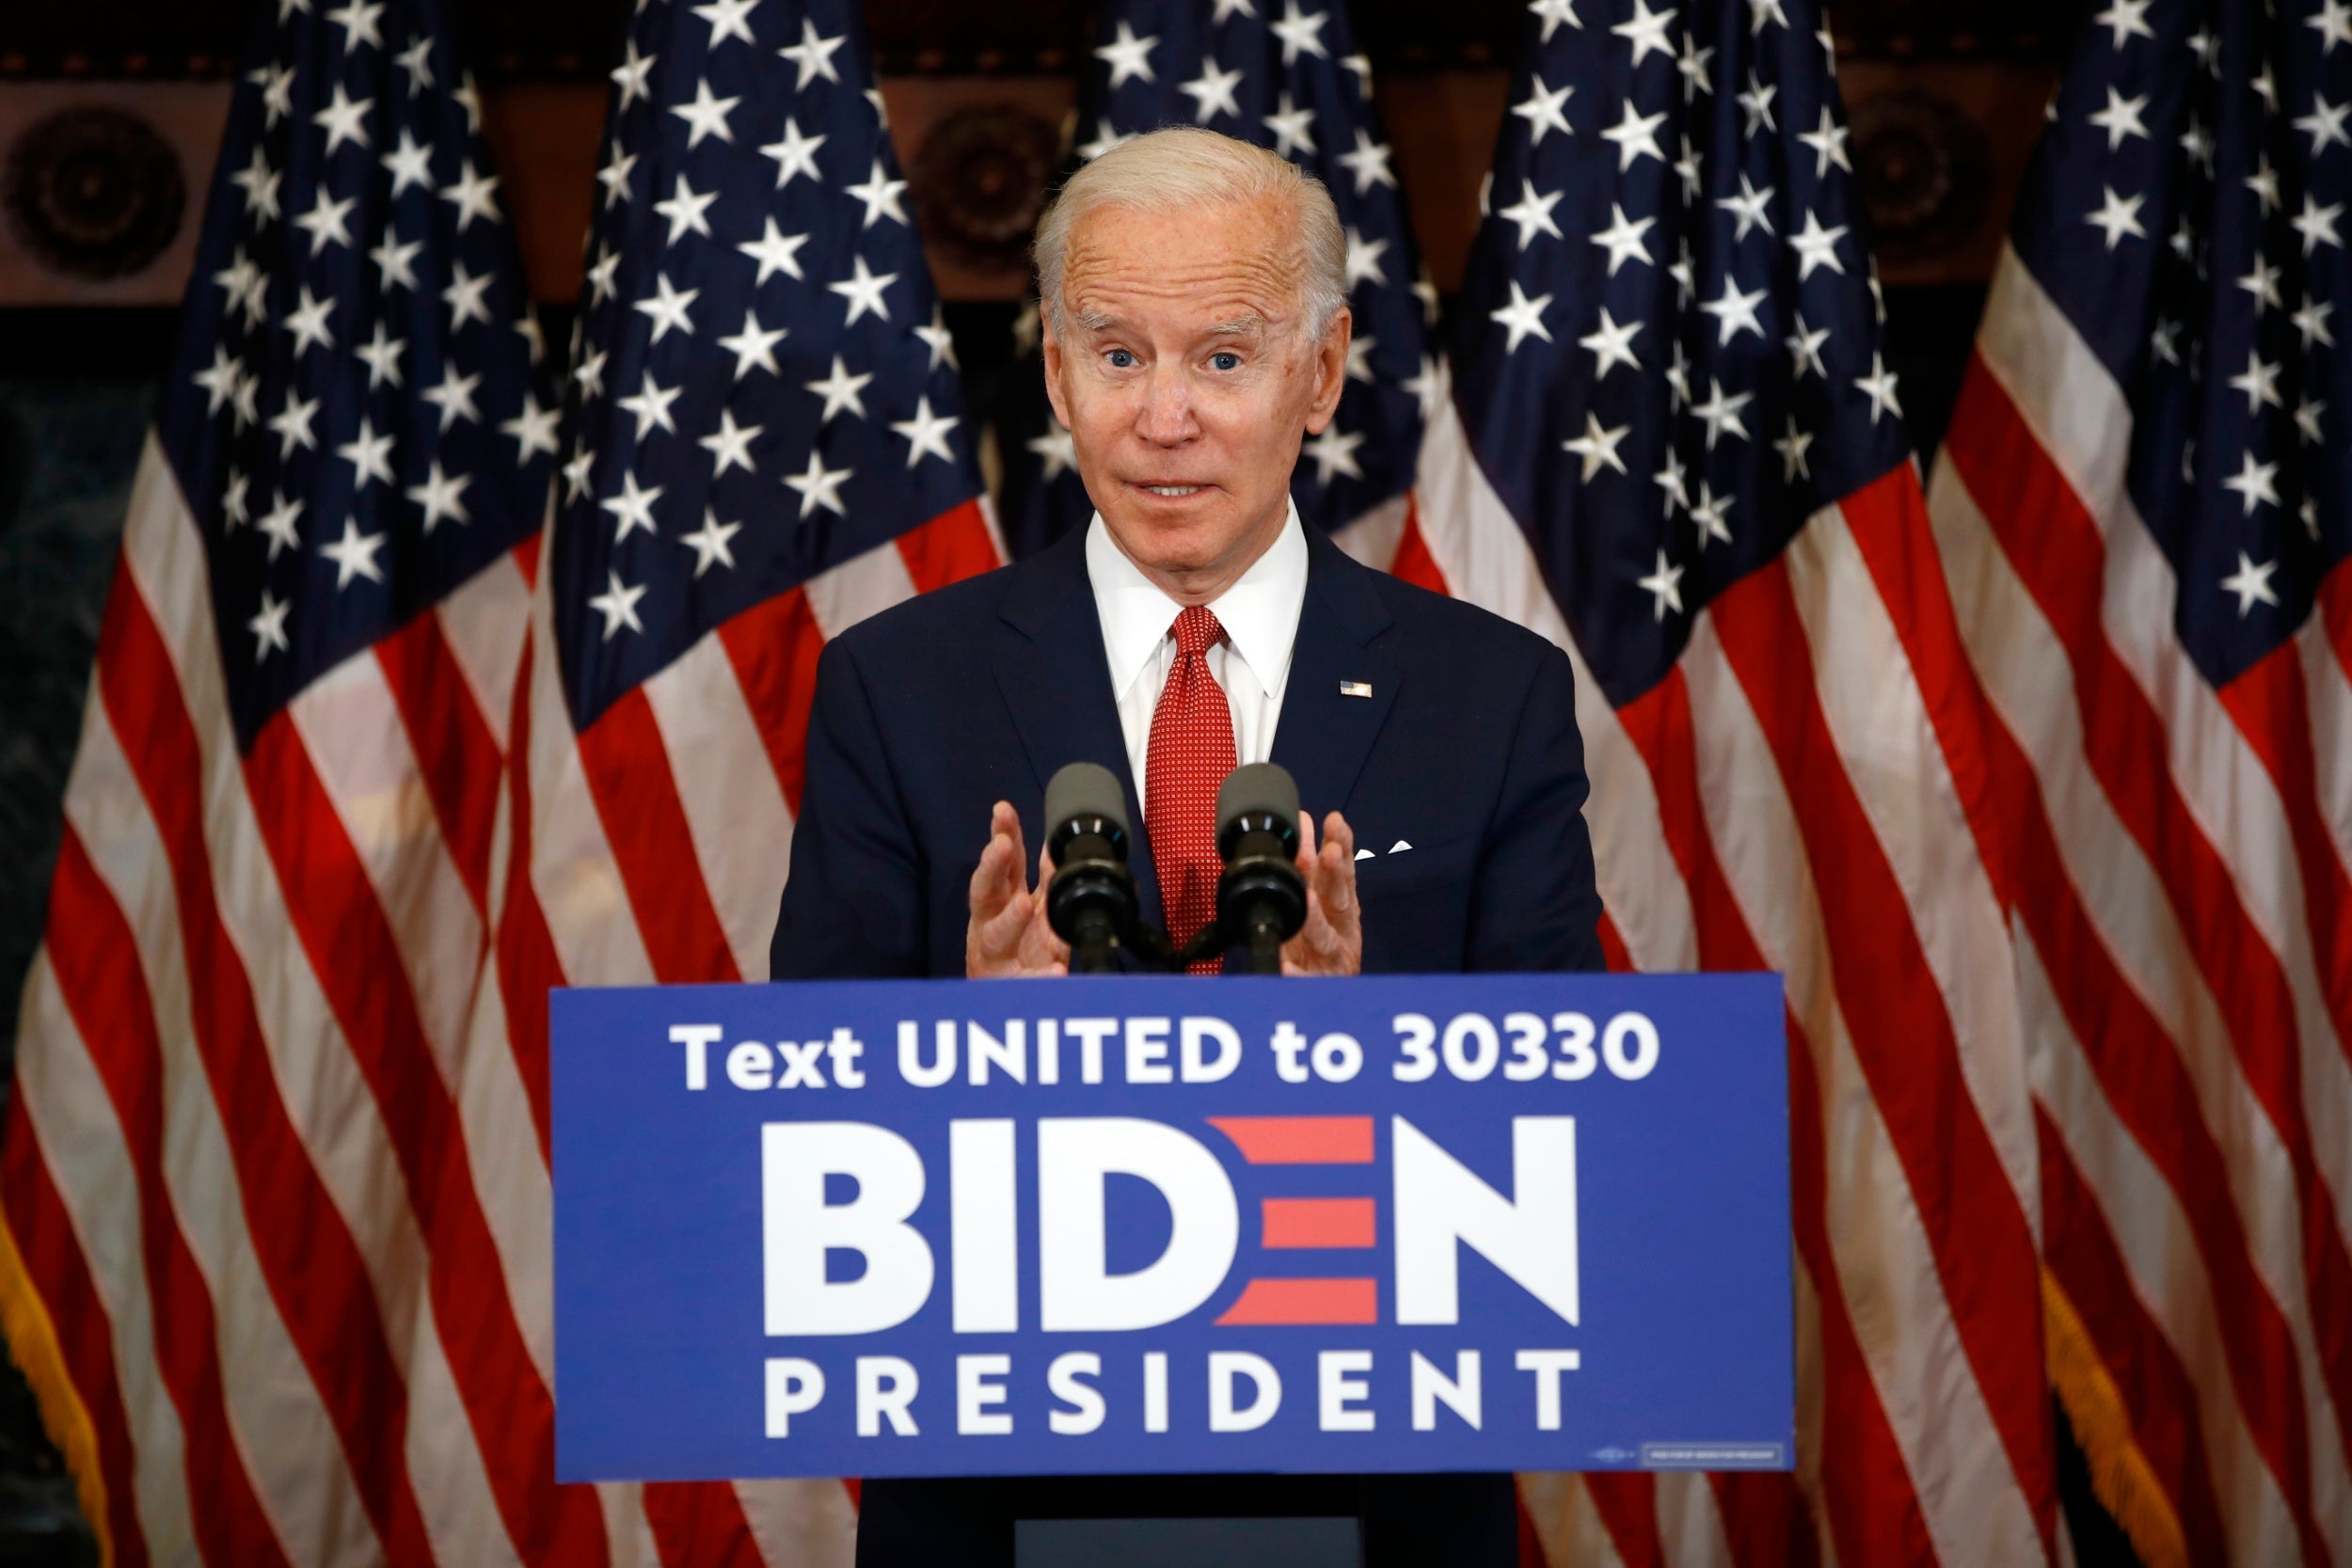 The presidency is now Biden's for the taking